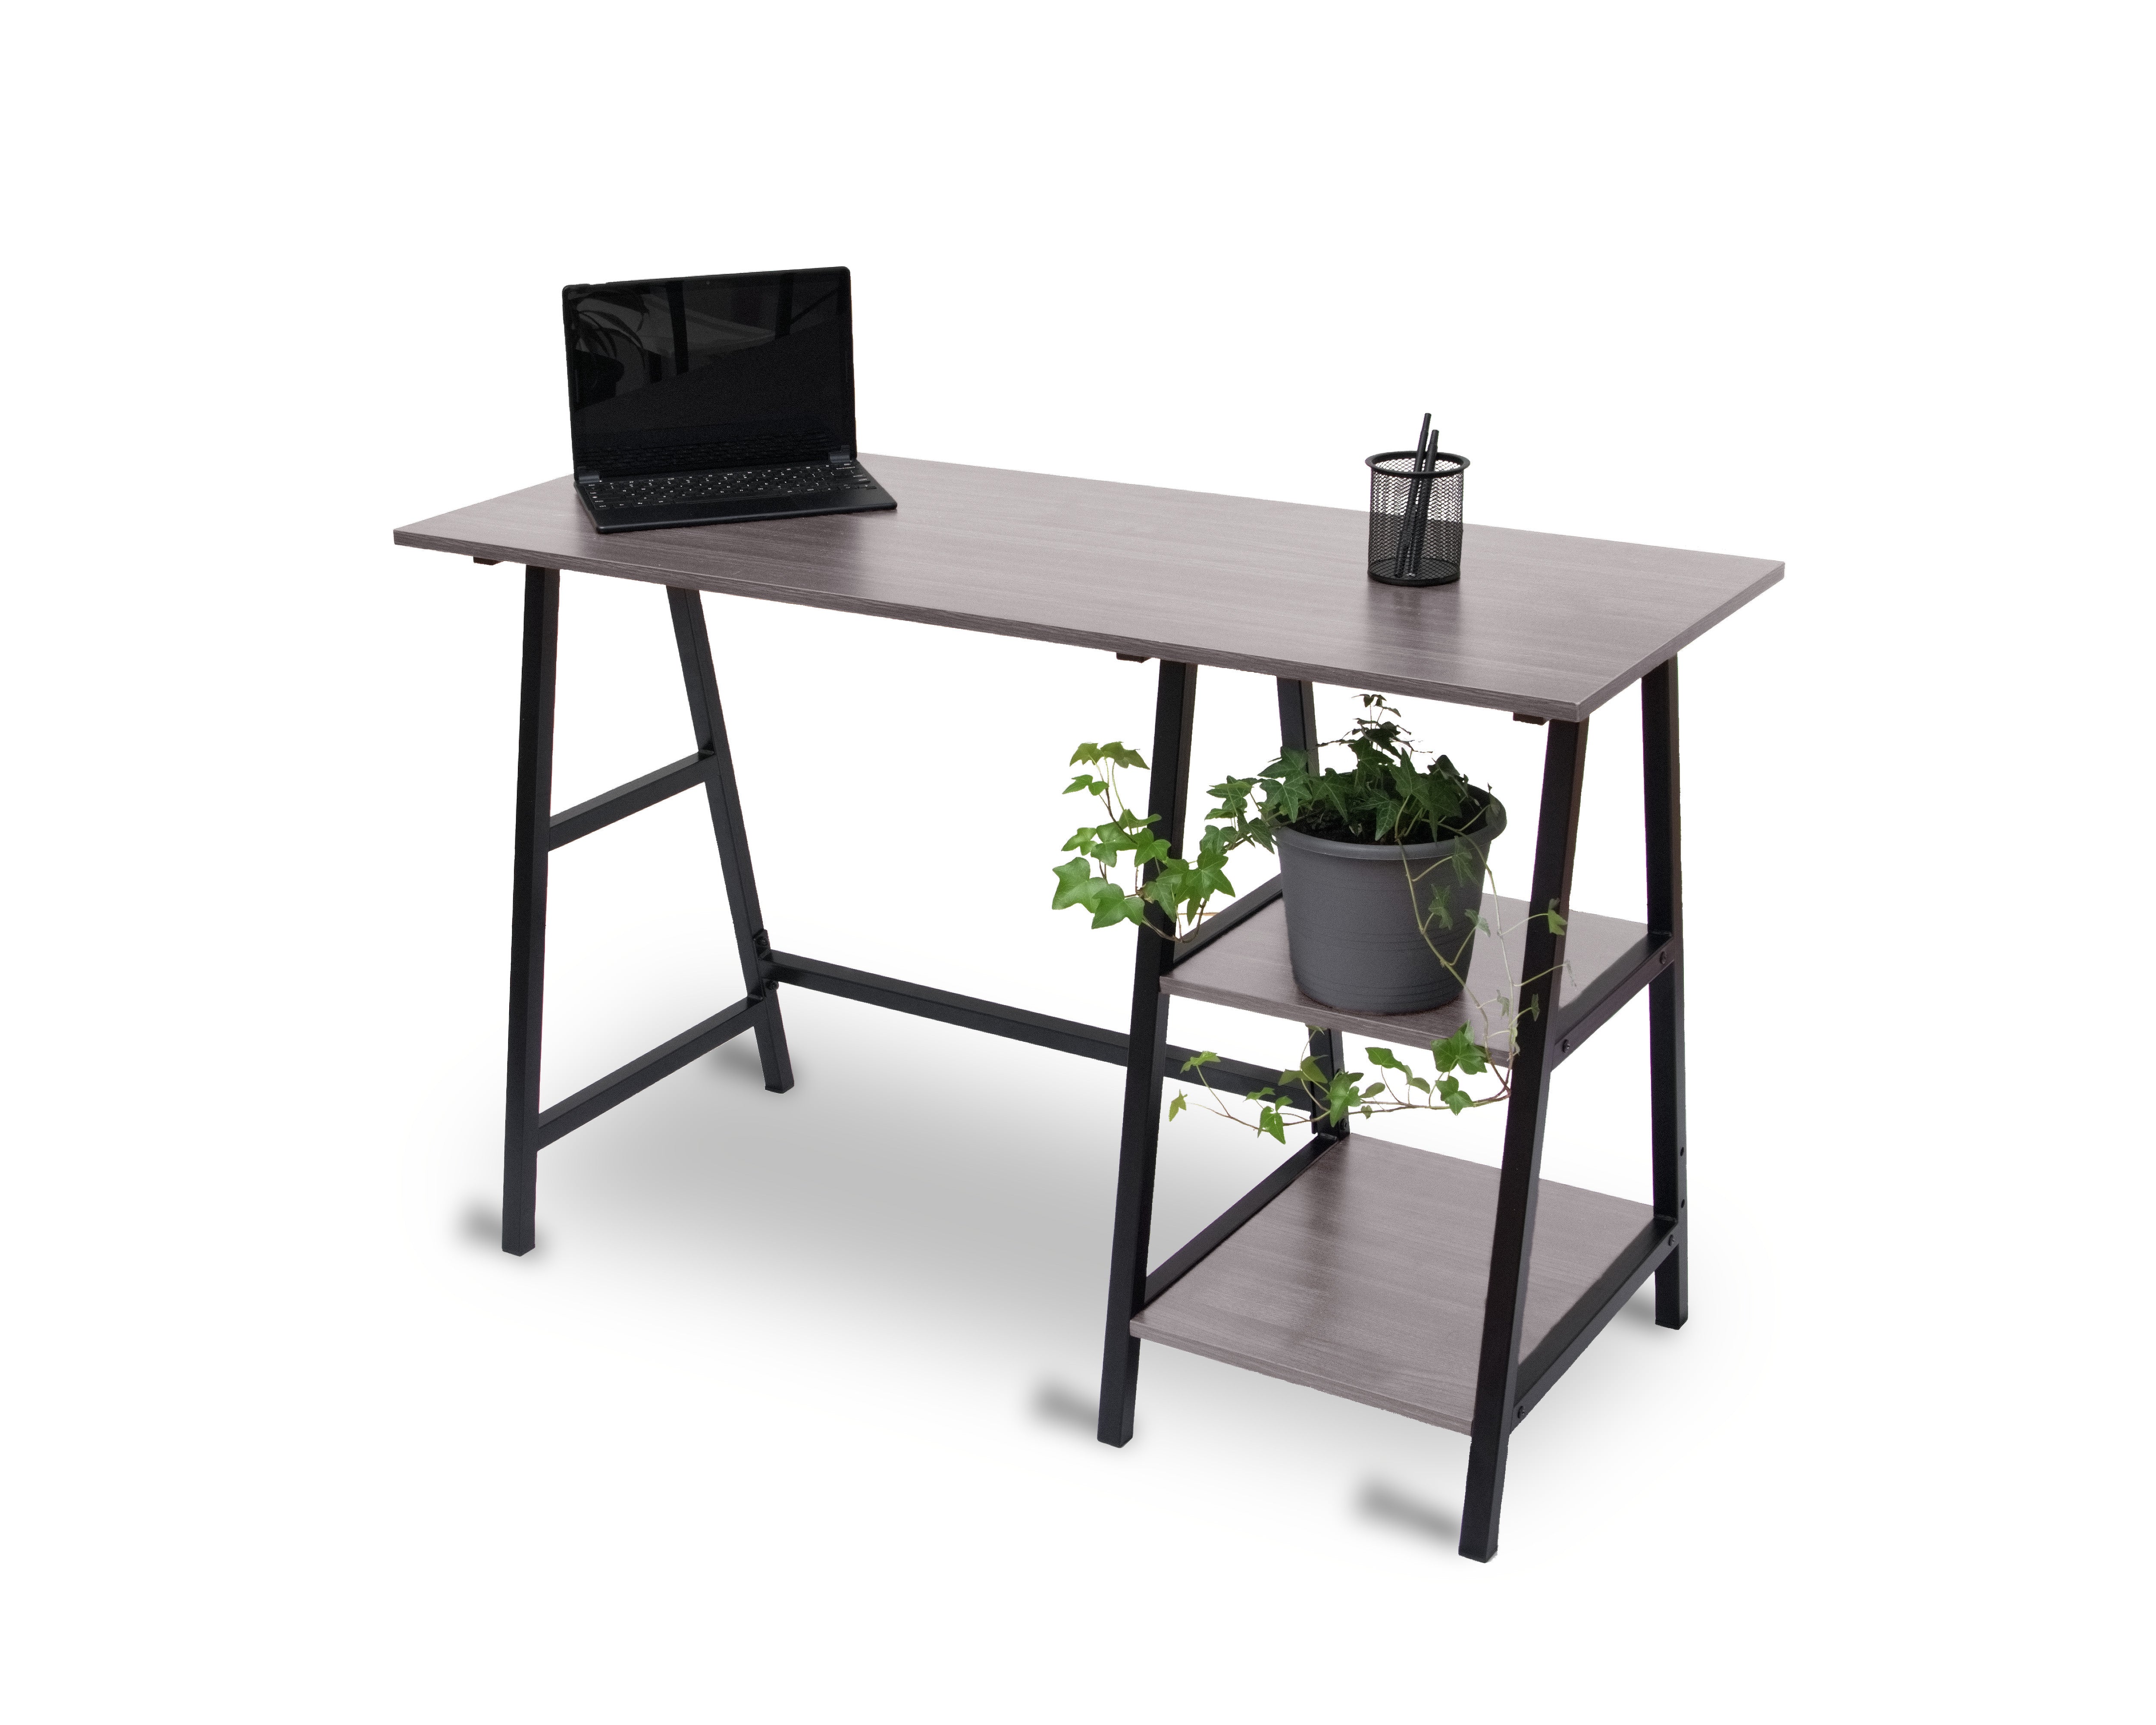 ZfLogic OFFICE SPACE Home Office Table Computer Desk with 2 Shelves (Smoke grey)